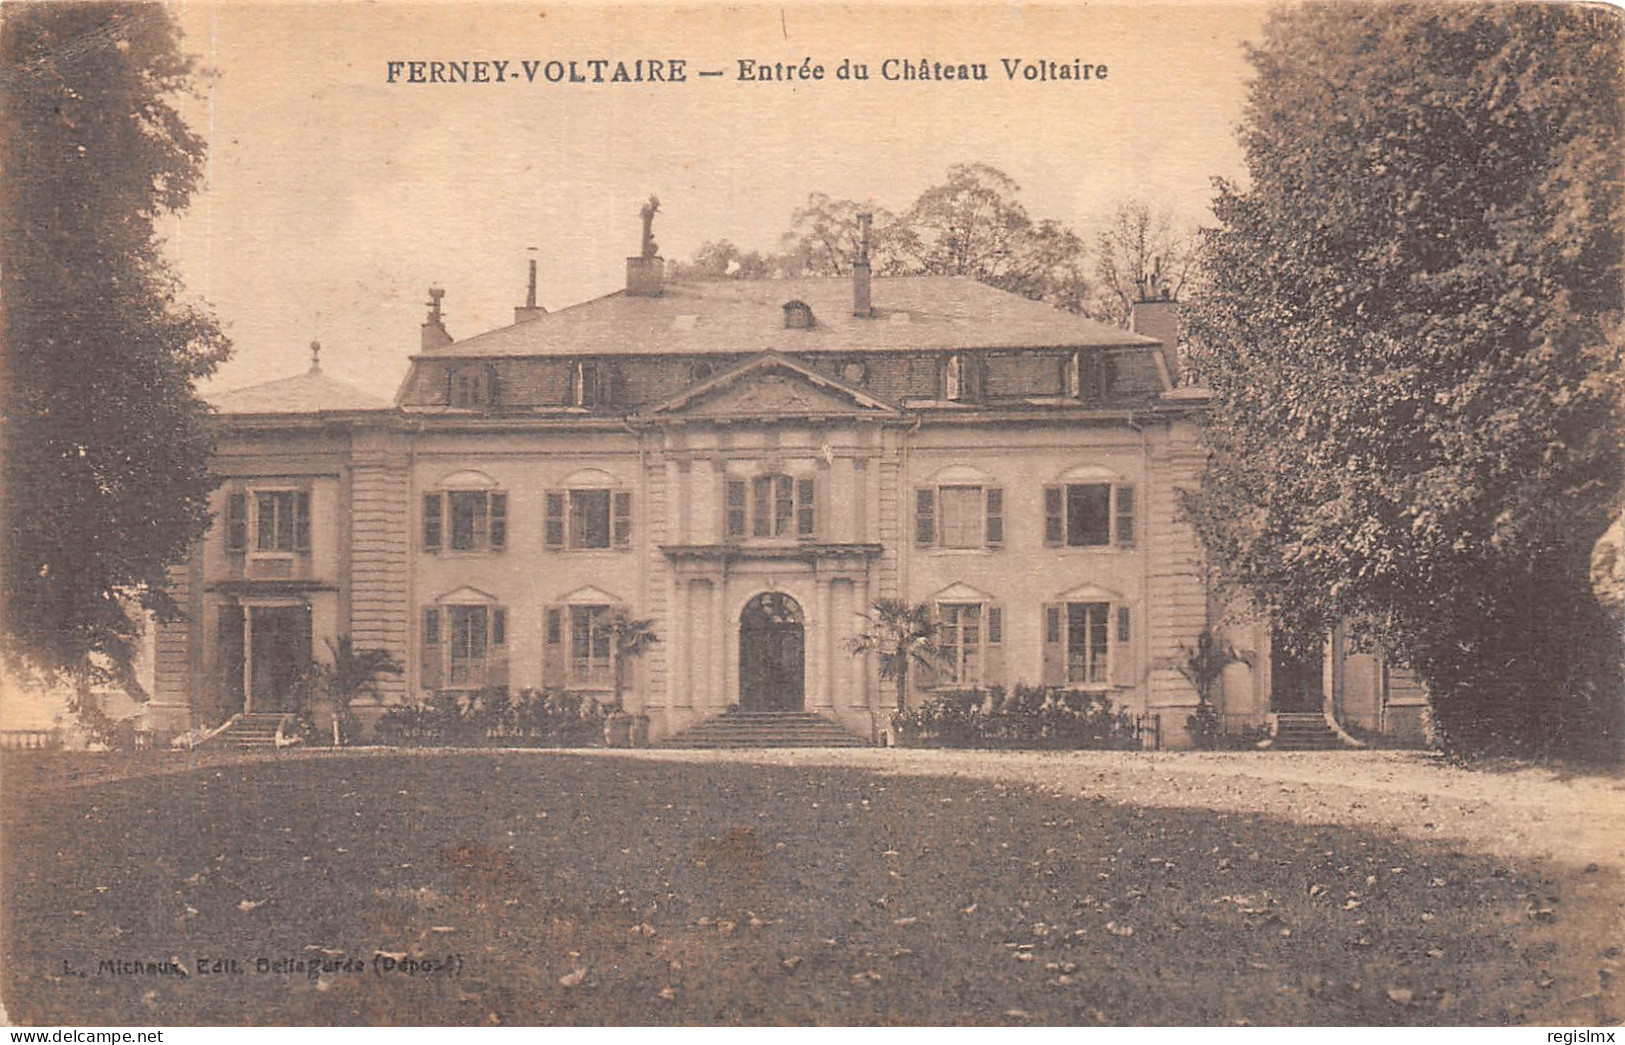 01-FERNEY VOLTAIRE-N°2114-C/0077 - Ferney-Voltaire